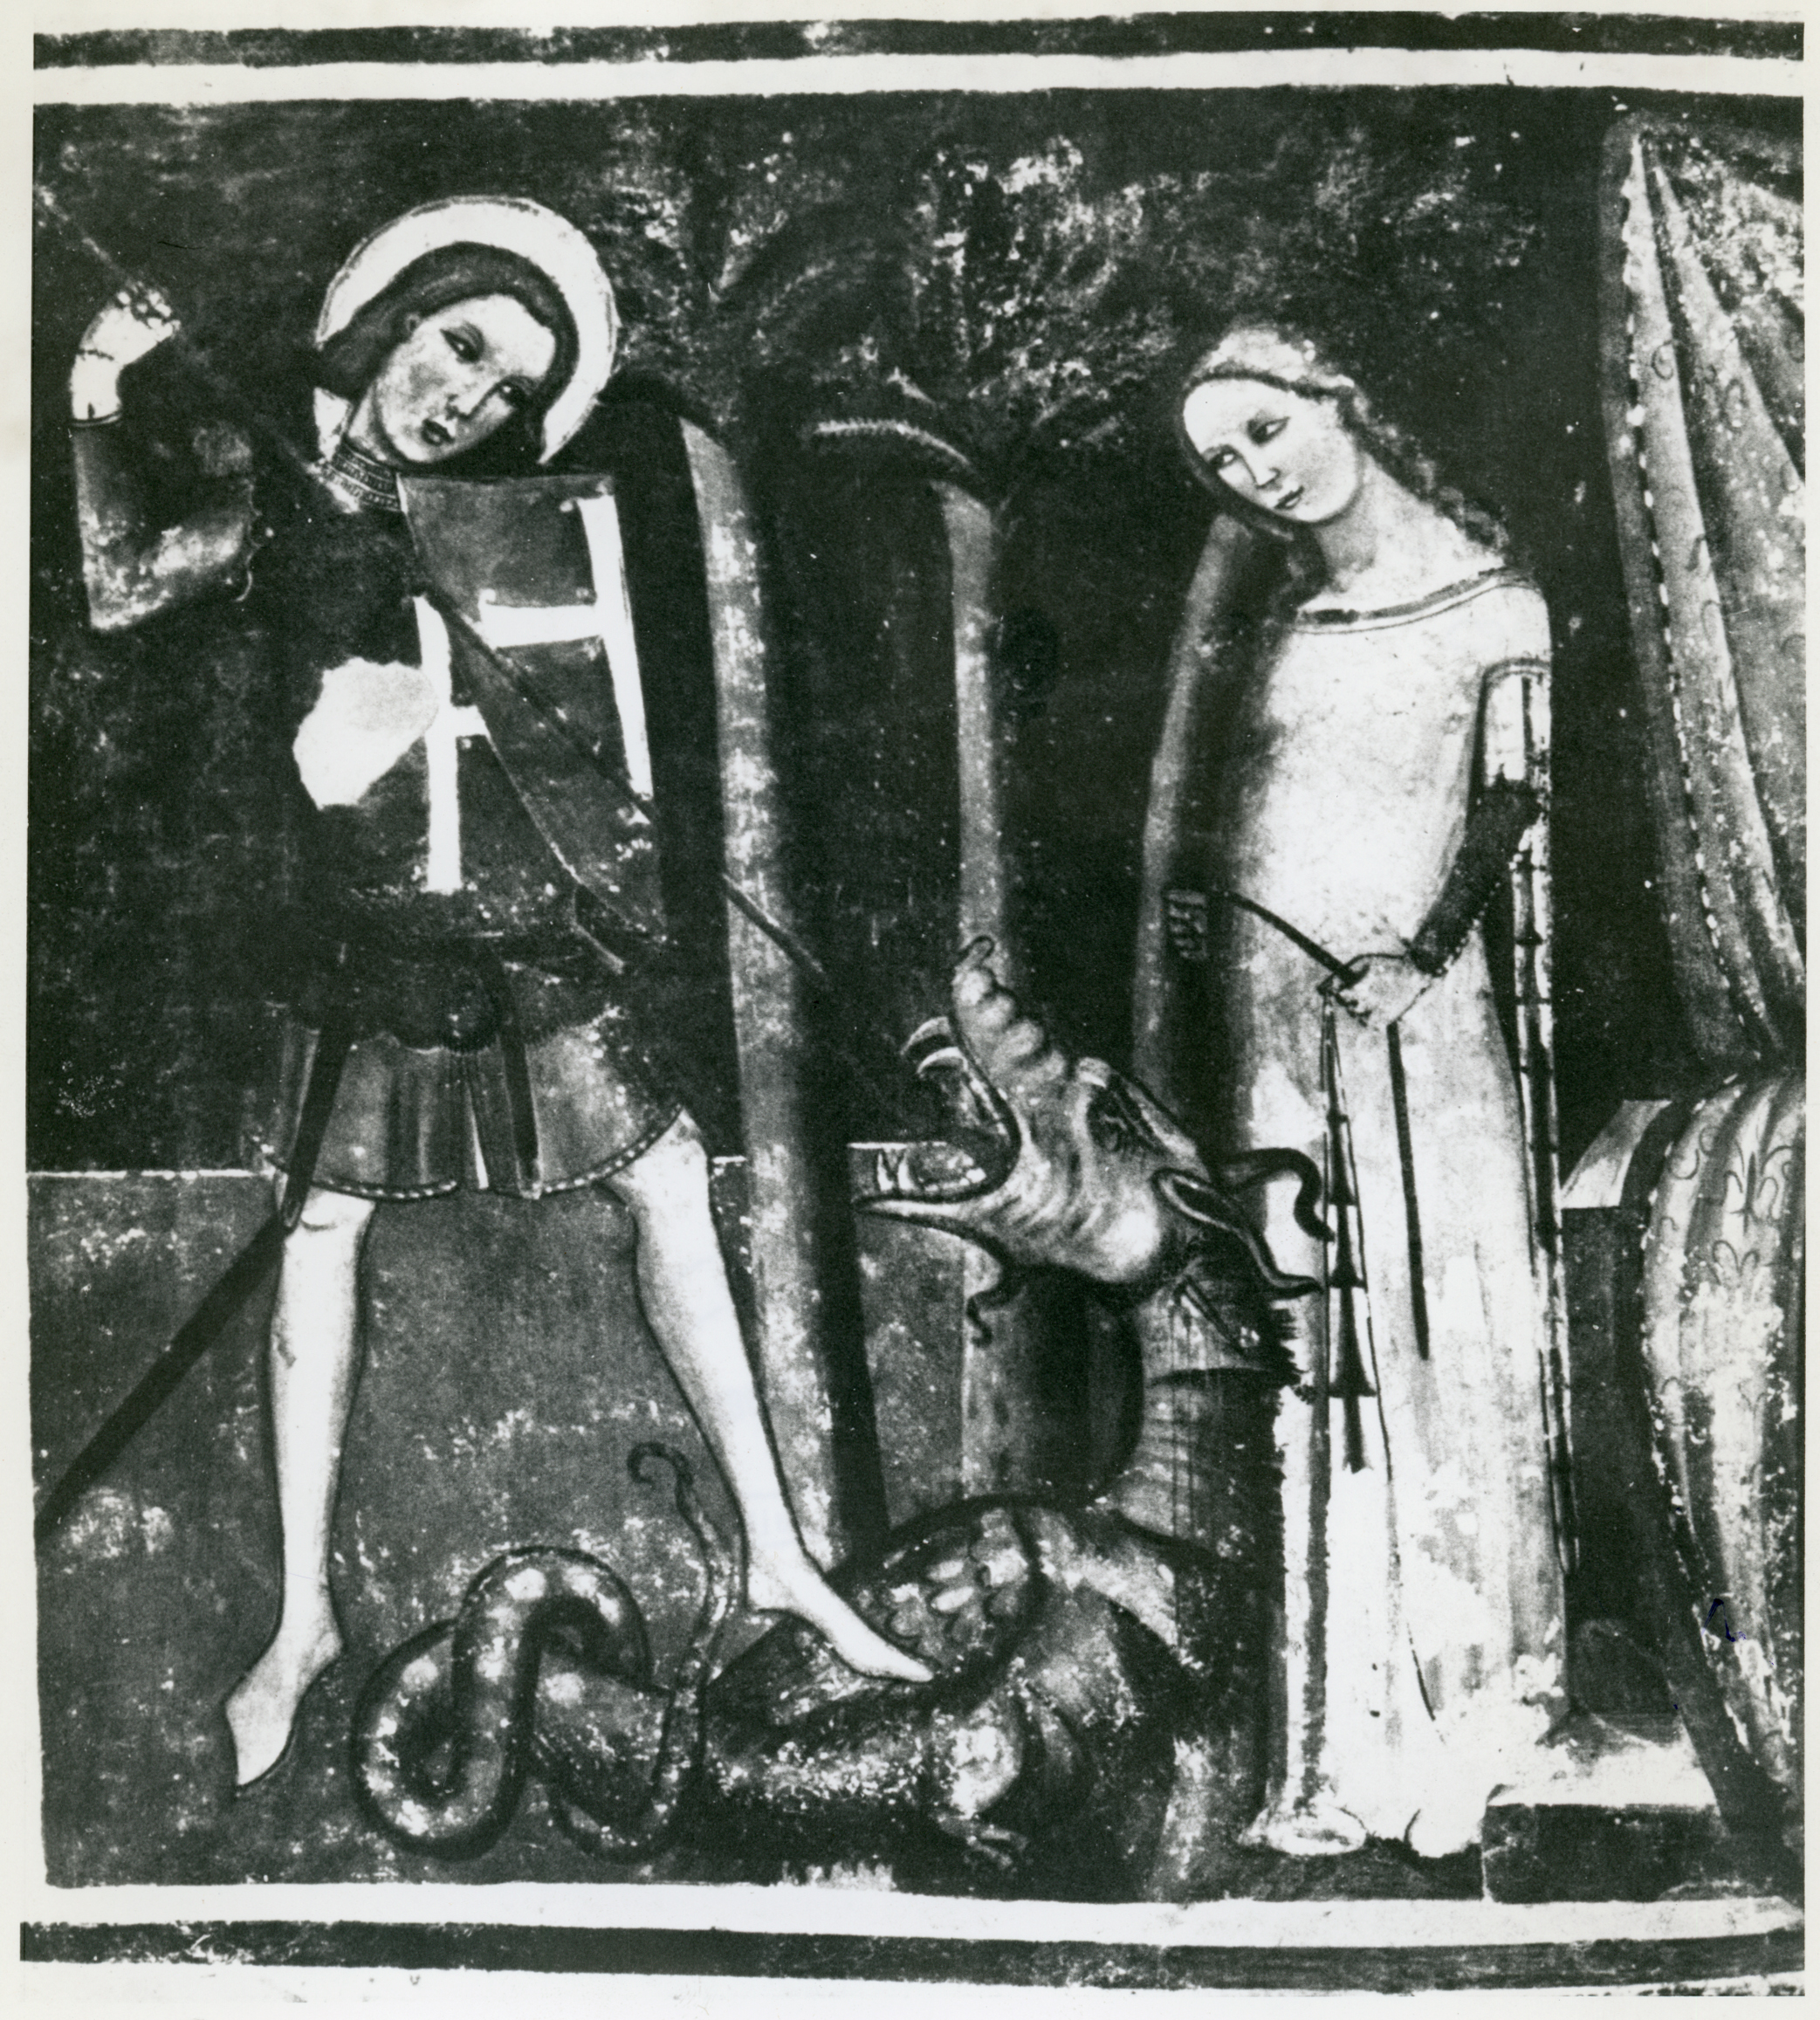 A princess, a dragon and a knight in shining armour, Fresco of Saint George in Venzone Cathedral, Friuli, 1976